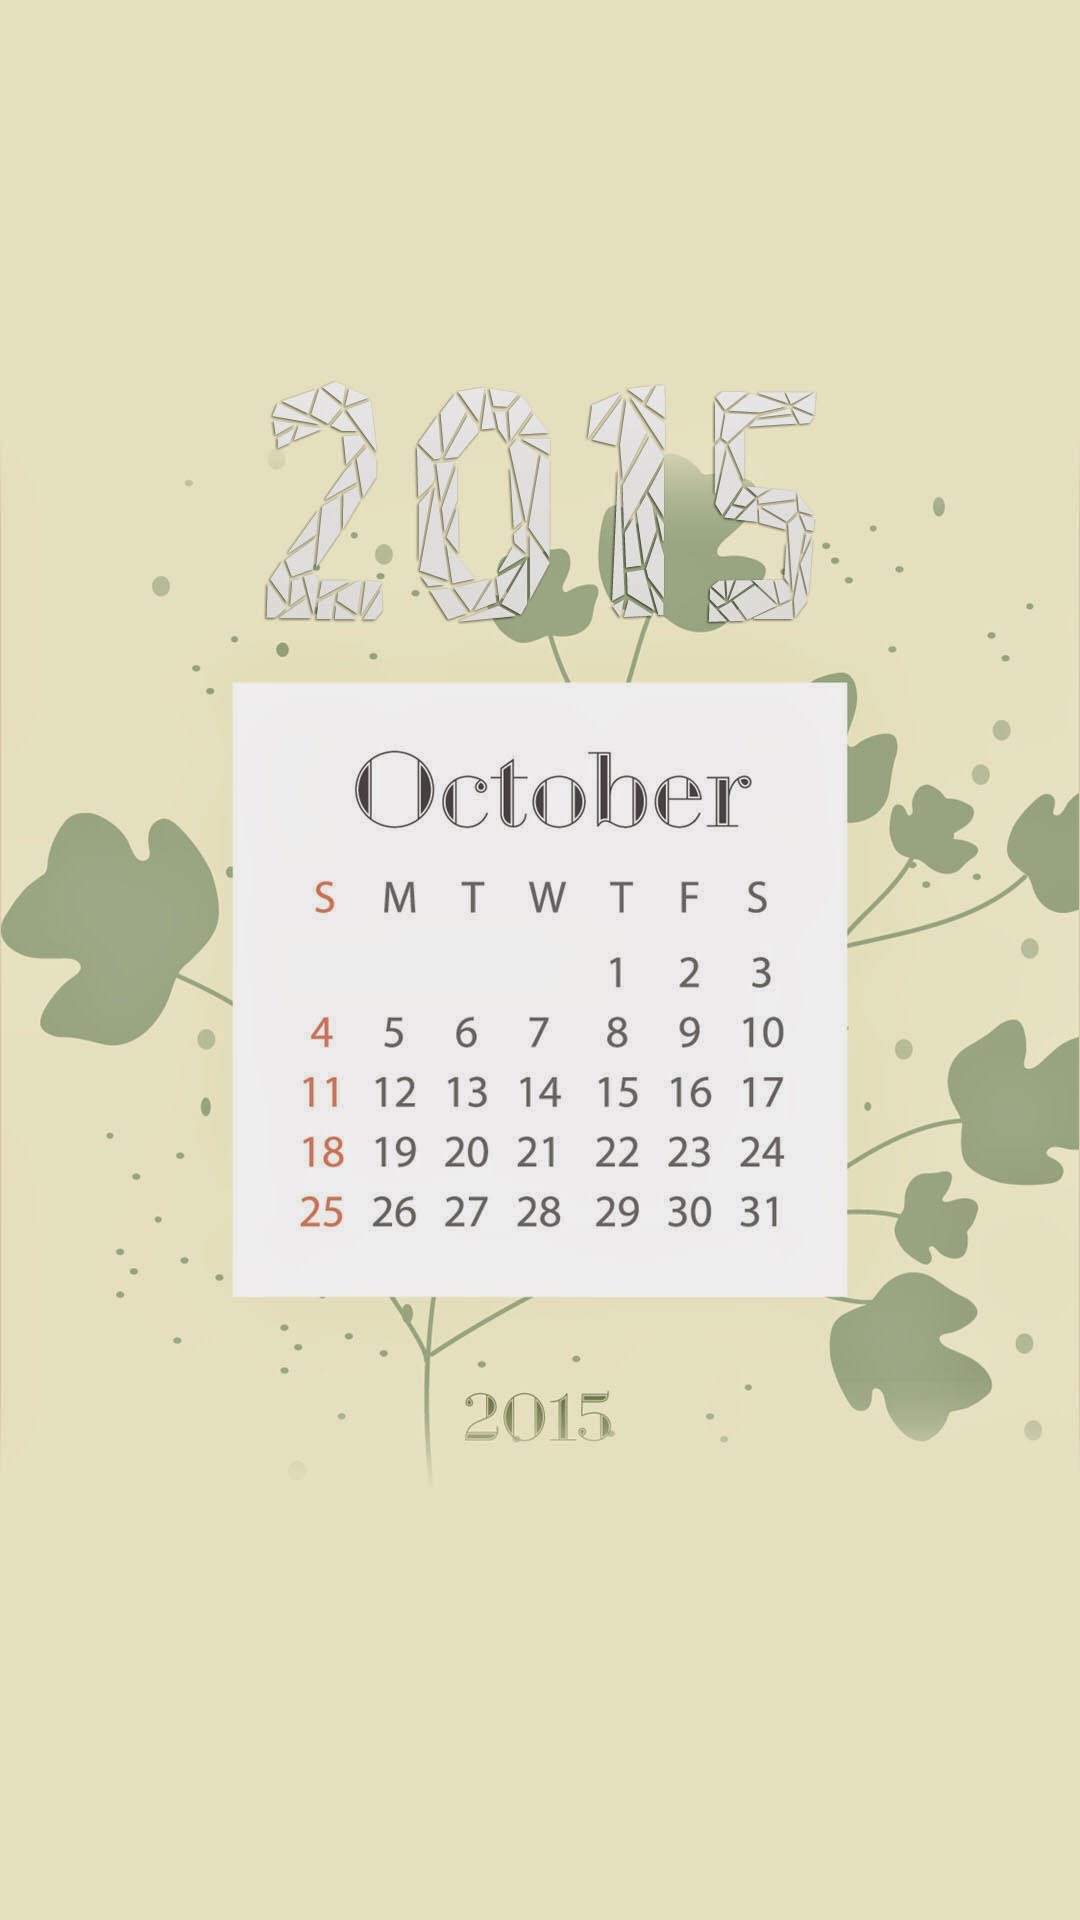 1080x1920 October Wallpaper of 2015 Calendar wallpapers collection for iPhones -  @mobile9